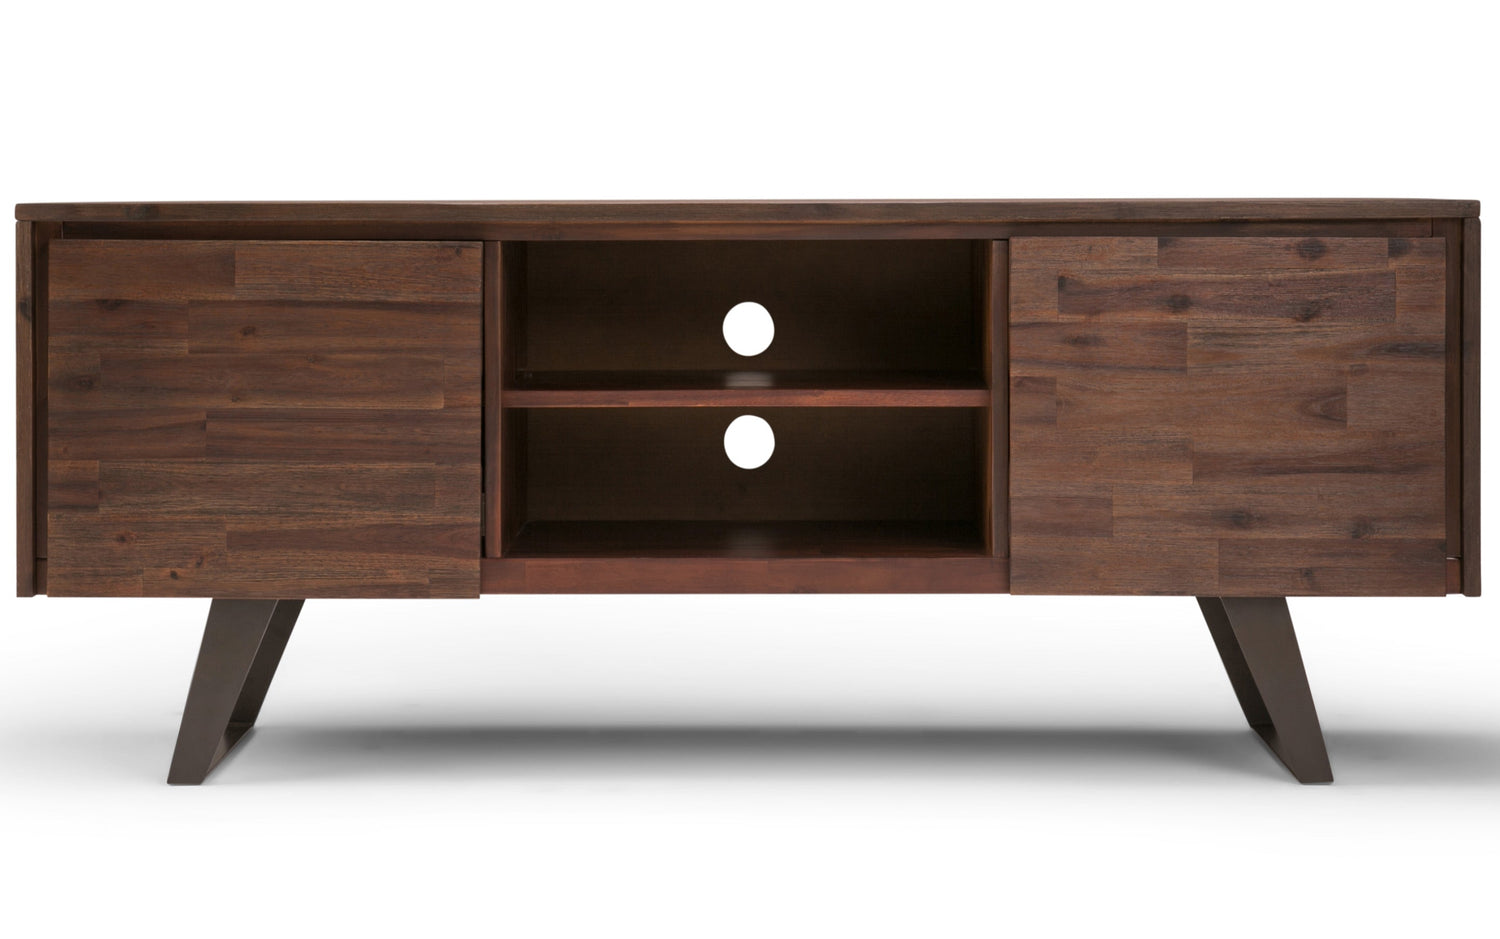 Distressed Charcoal Brown | Lowry Solid Acacia Wood Wide TV Media Stand For TVs up to 70 Inches